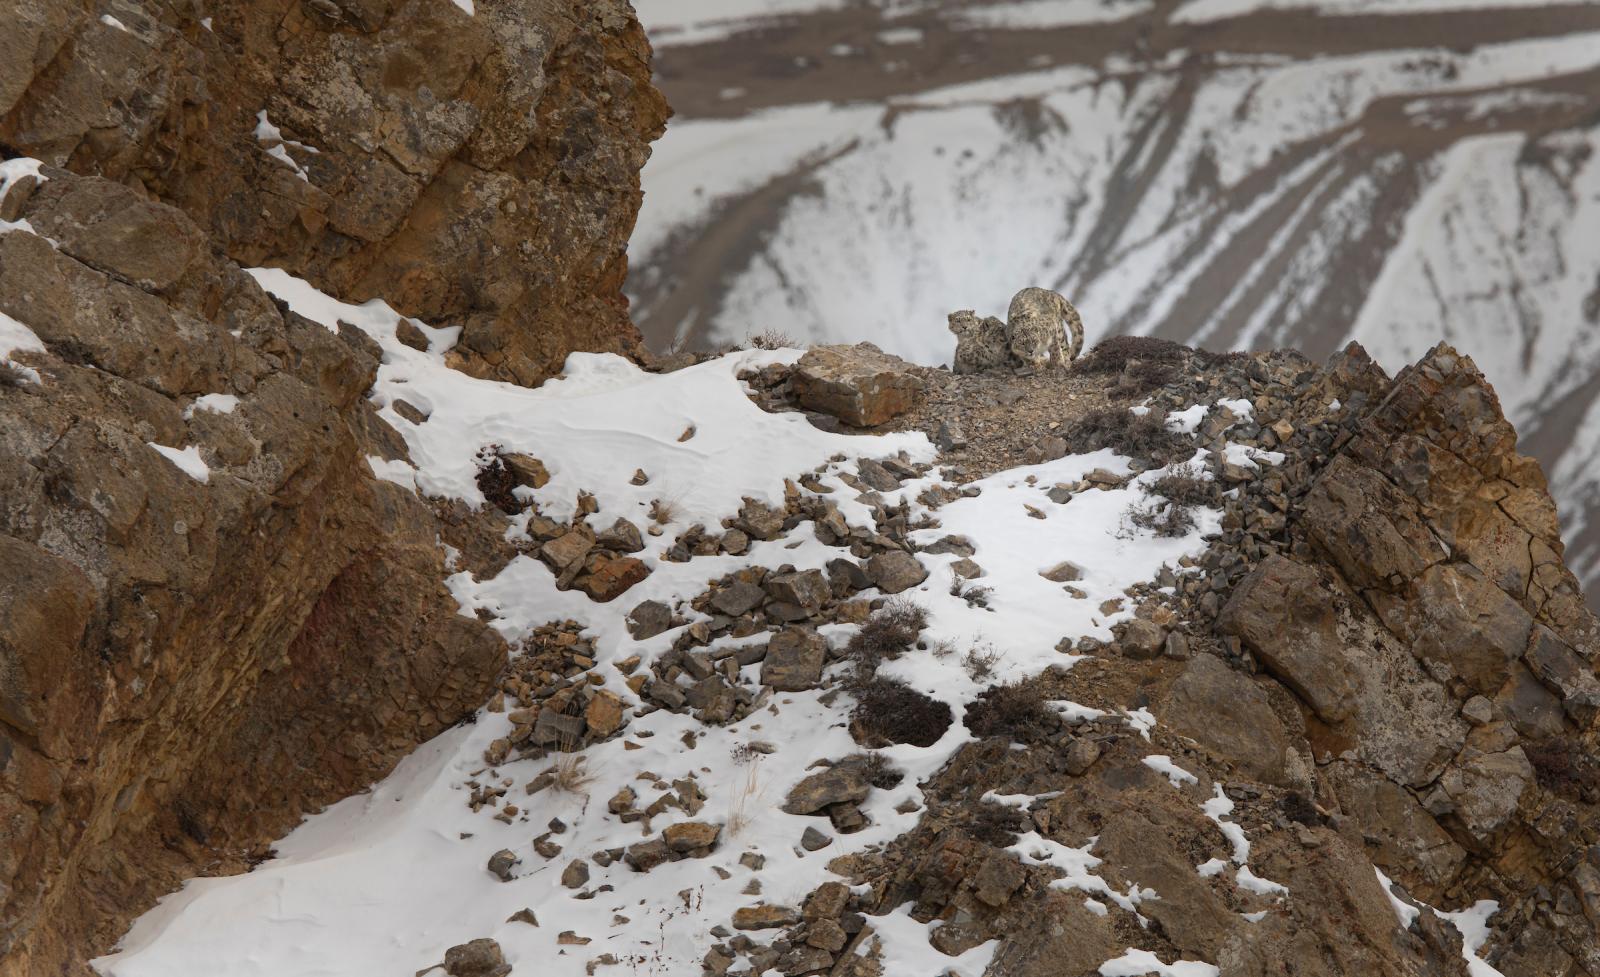 Thumbnail of A snow leopard family in the fre_ng weathers of Indian himalayas 